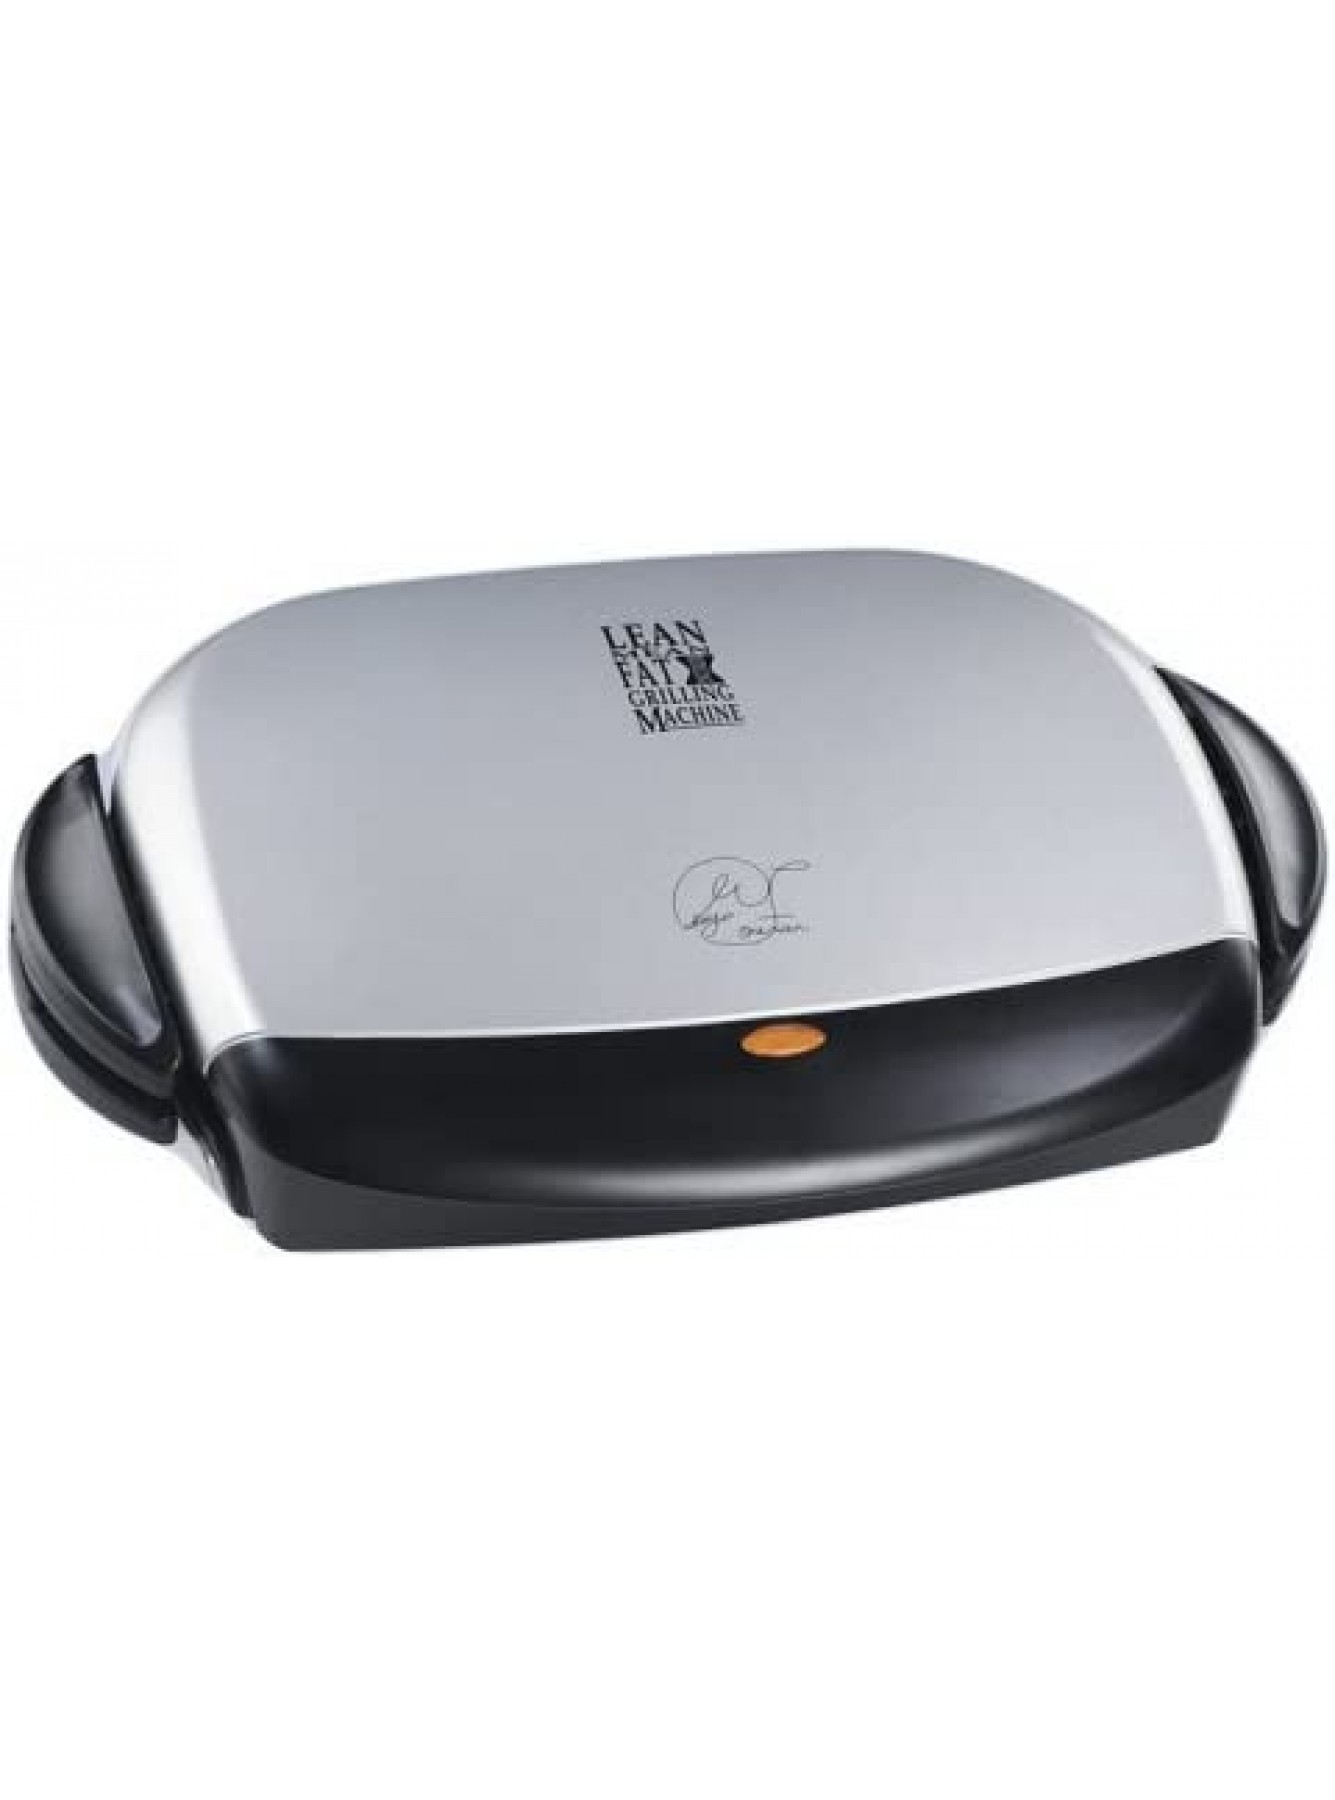 George Foreman GRP4P 4-Burger Grill with Removable Plates Platinum B000GDDJL8